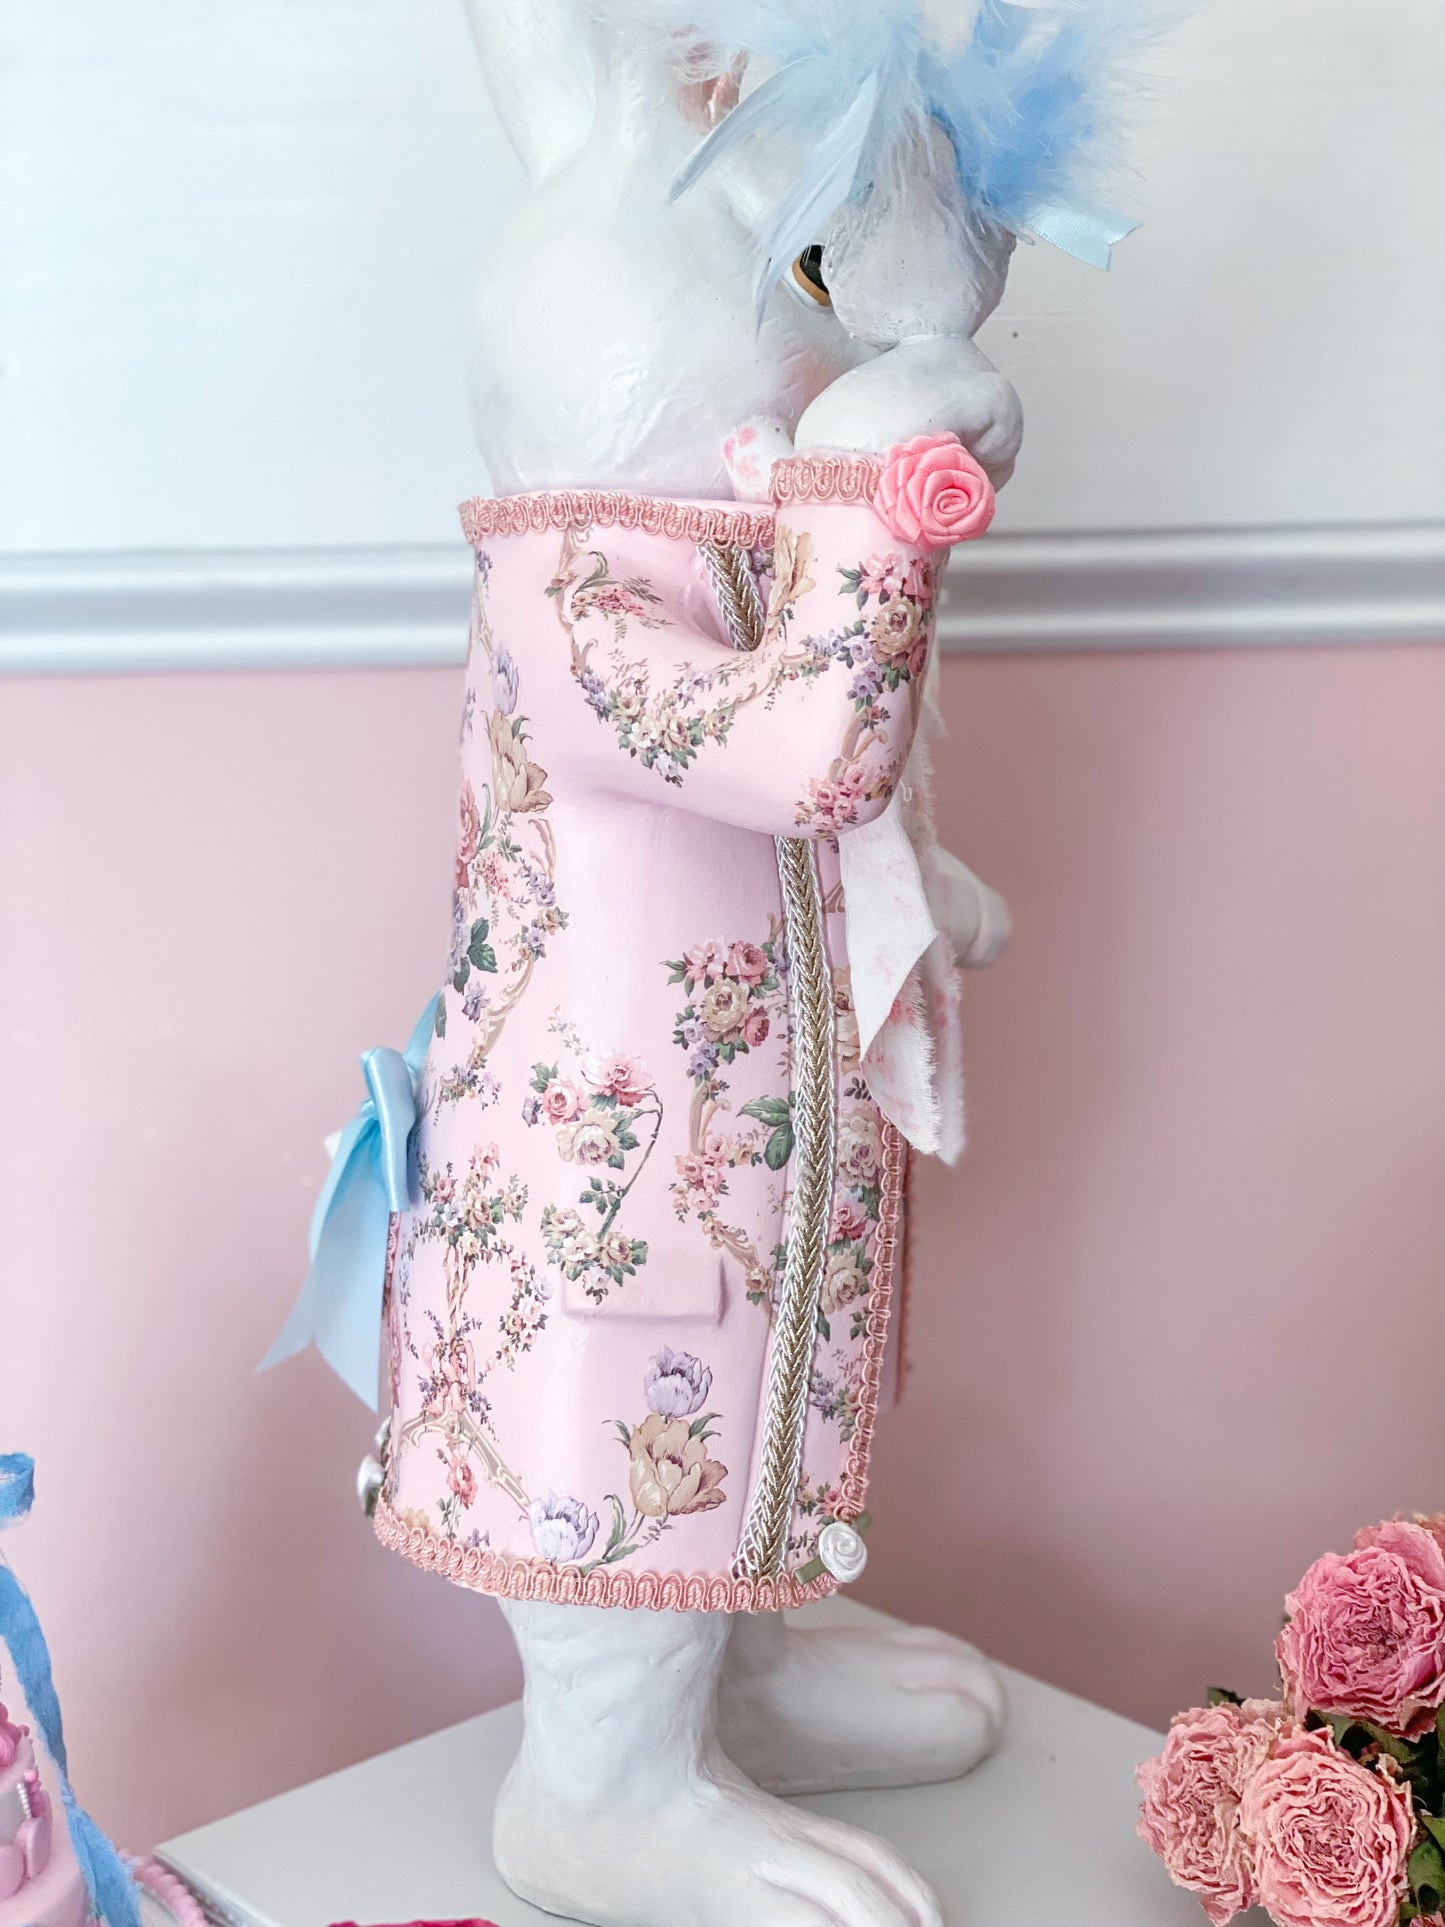 GLOW-UP COMMISSION: Bespoke Pastel Pink Rococo French Dandy Bunny with Brocade Style Jacket